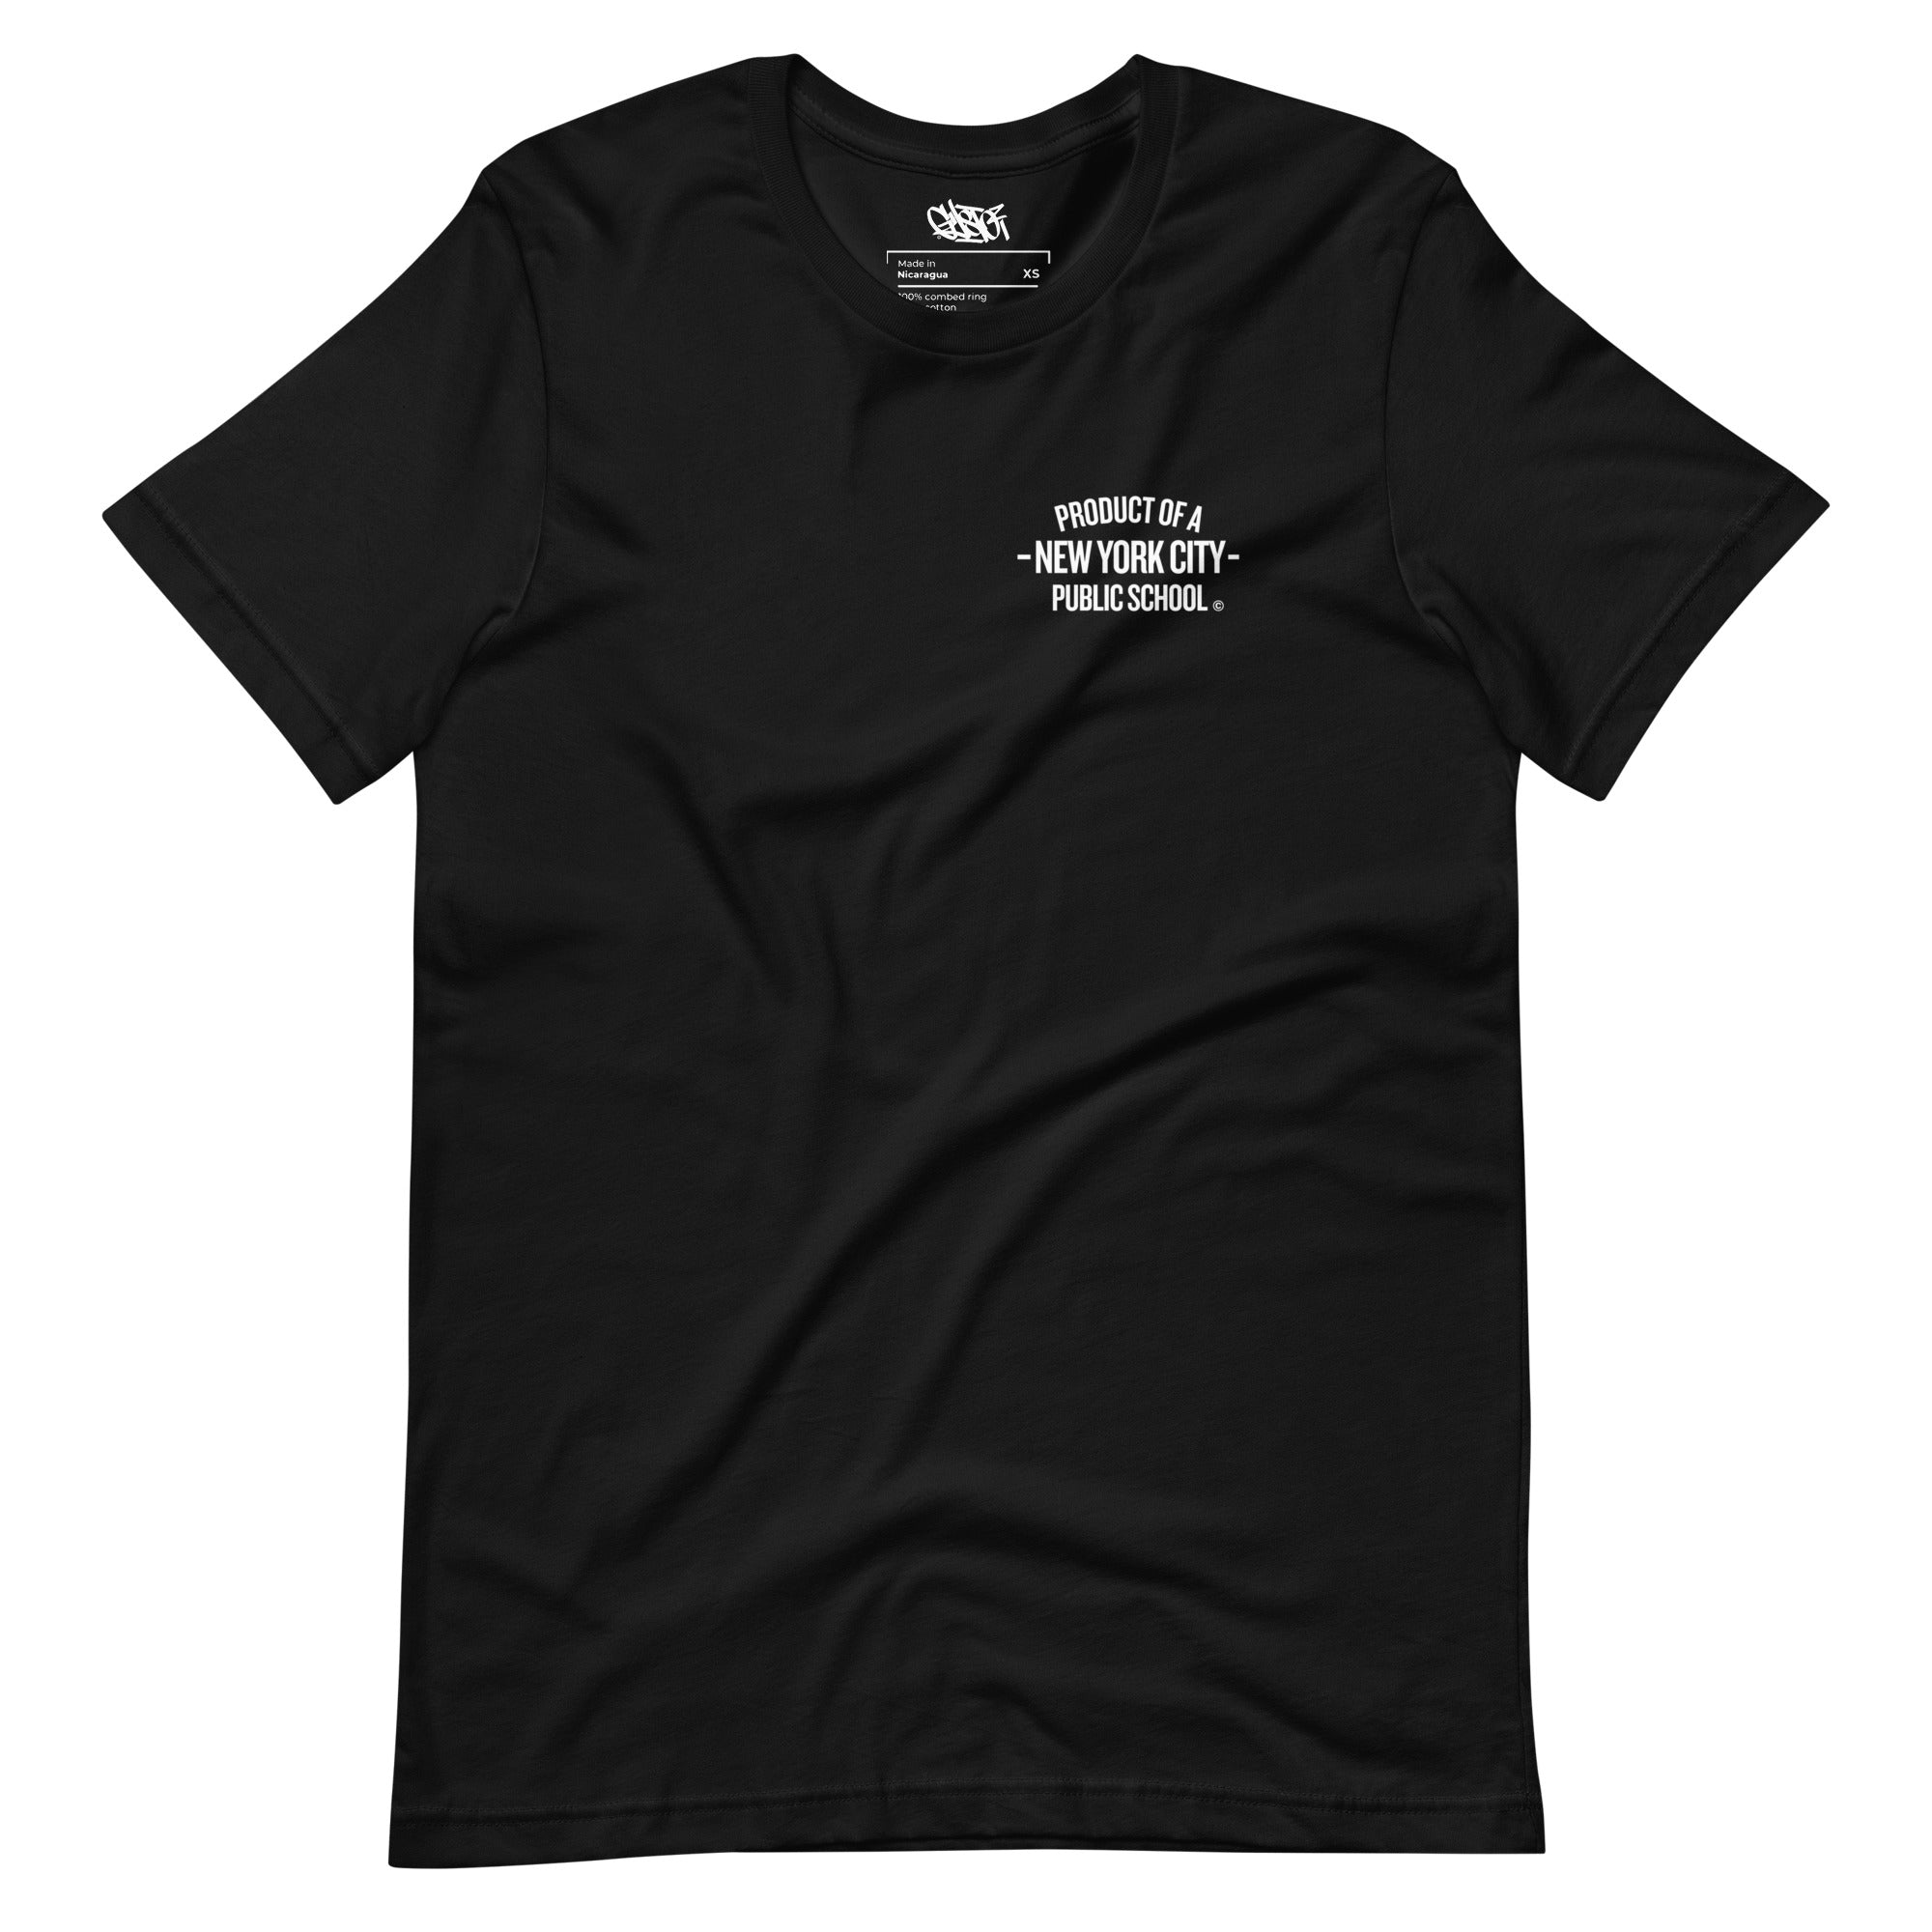 Product of a NYC Public School - Unisex T-Shirt